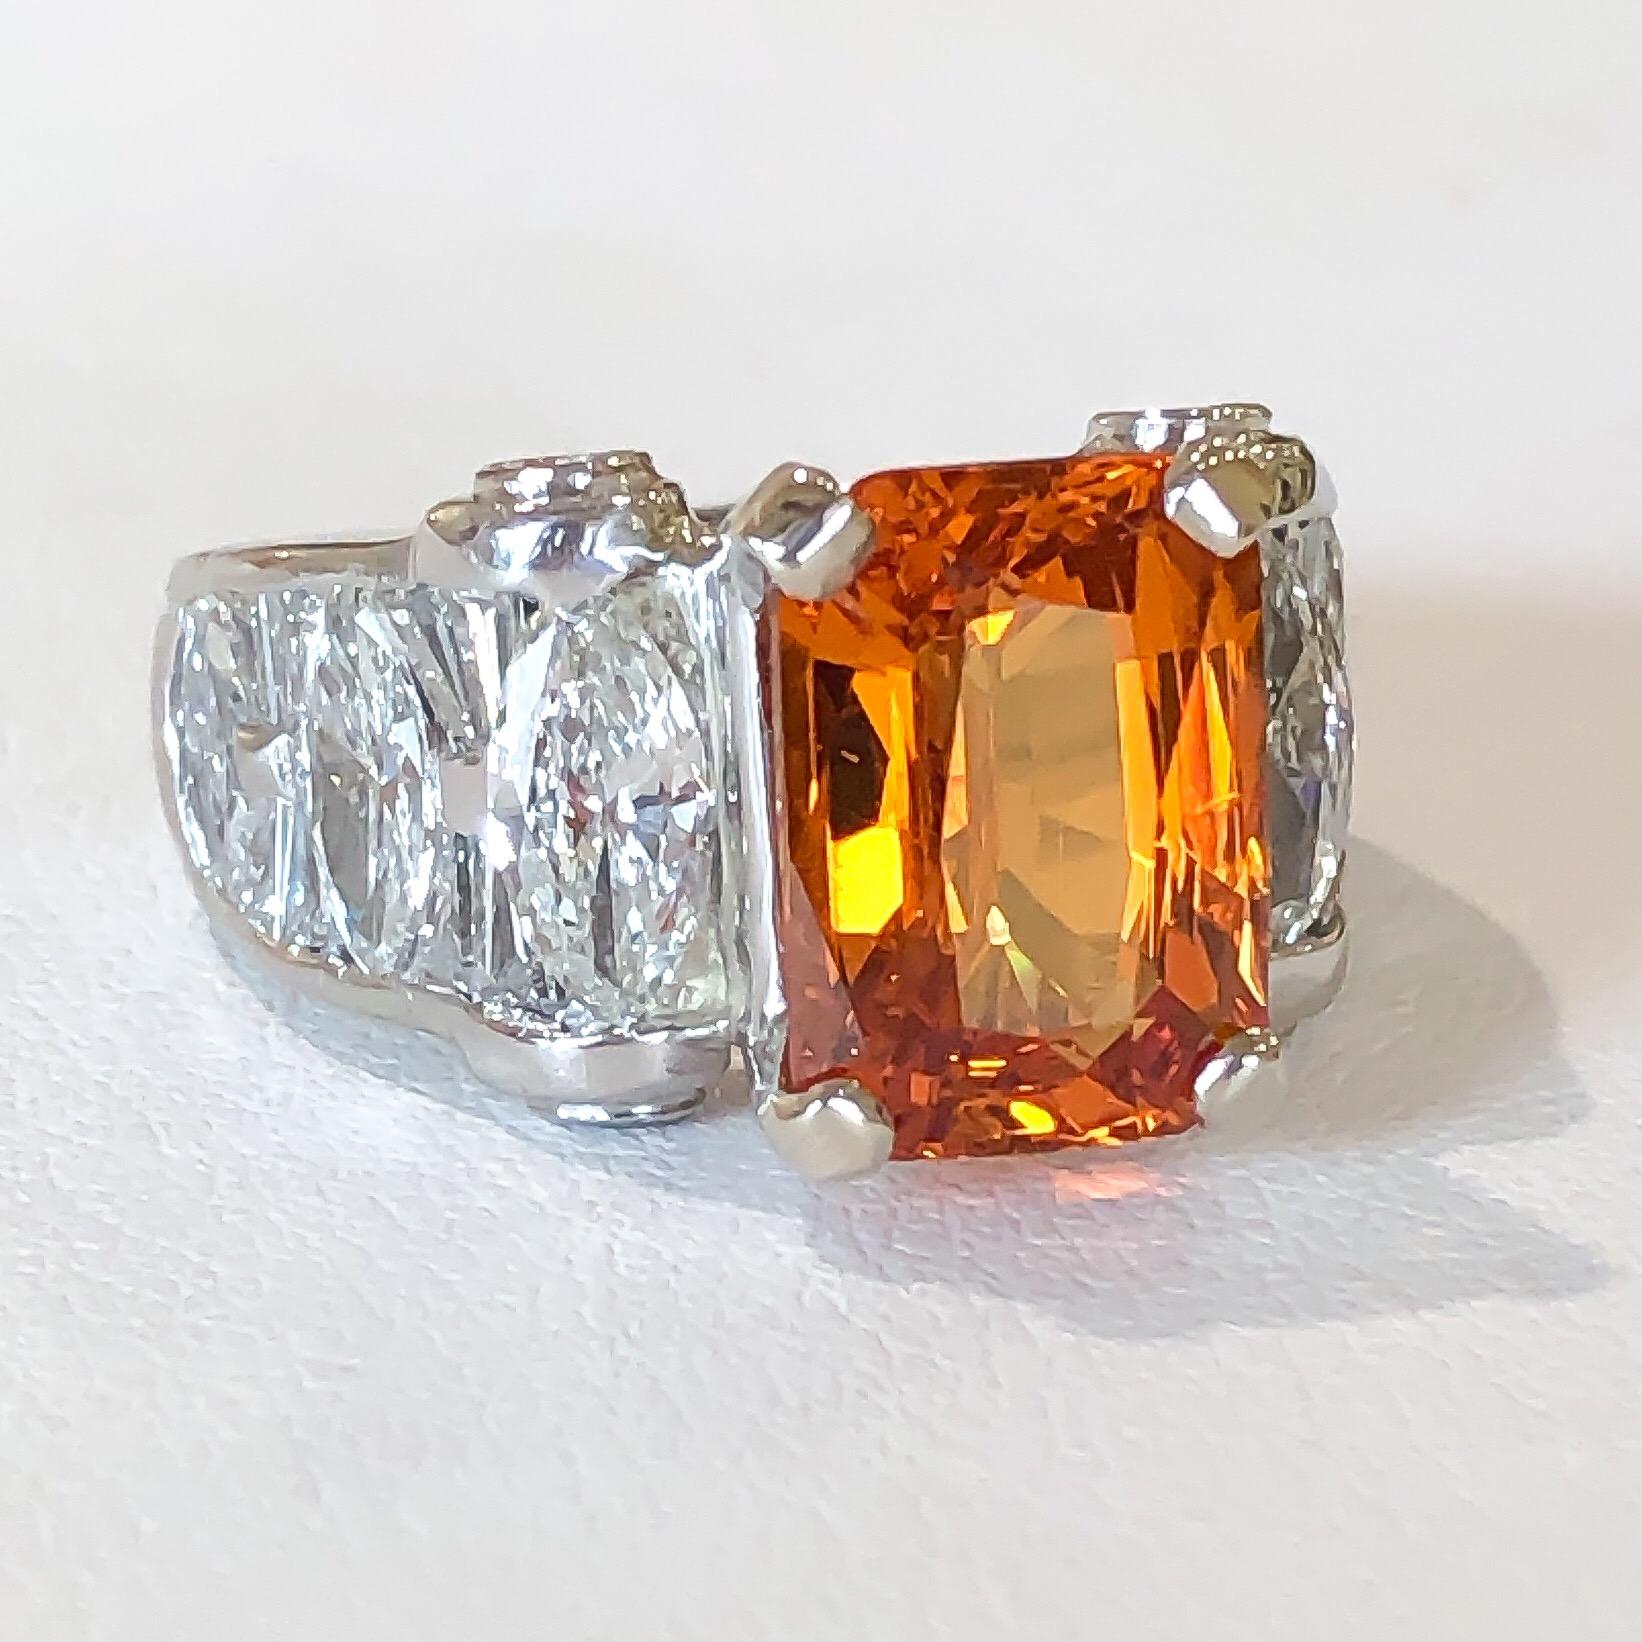 This ring is designed by J.B. STAR in Platinum, set with a vibrant natural mandarin Spessartite Garnet. The Spessartite Garnet is a fancy mixed radiant cut shape set in four heavy prongs. Marquise, tapered baguette, and round brilliant diamonds